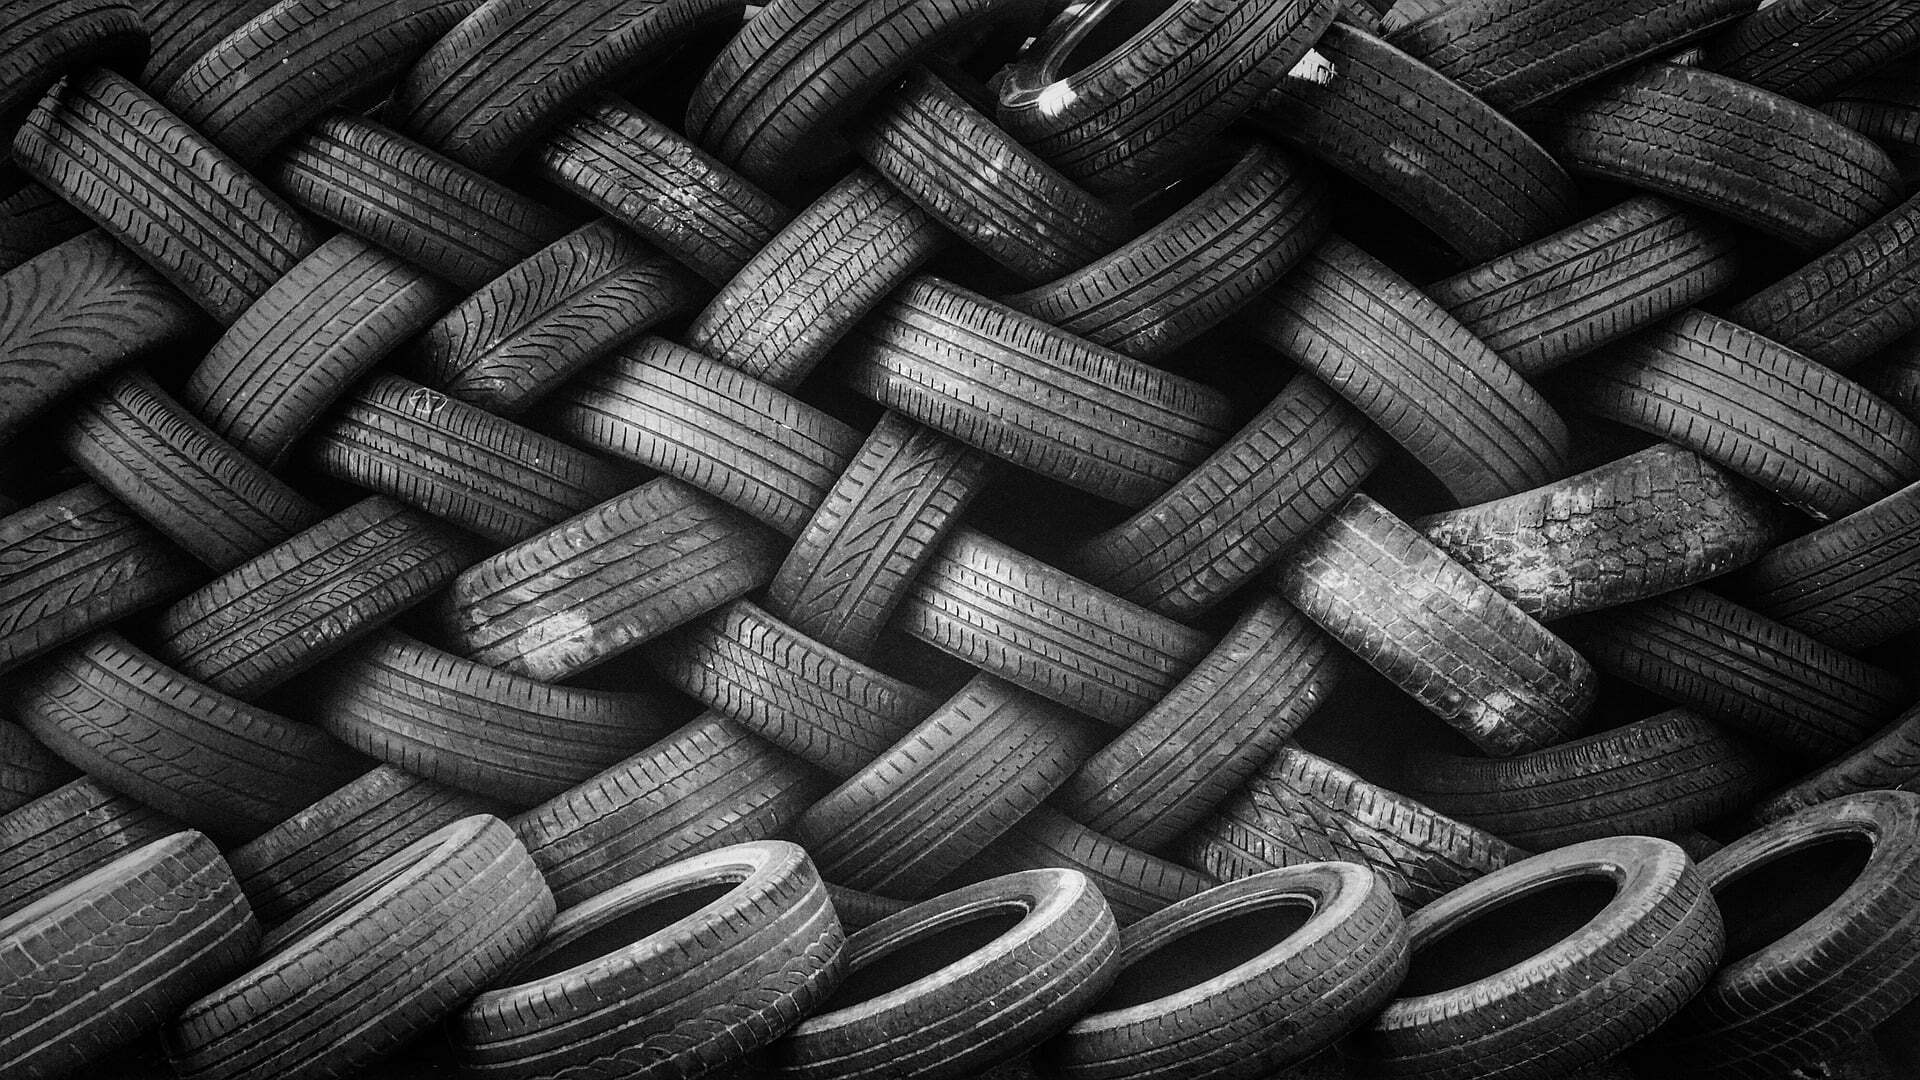 pile g28673b80f 1920 Bridgestone Aims To Start Tire Recycling With New Tech By 2030